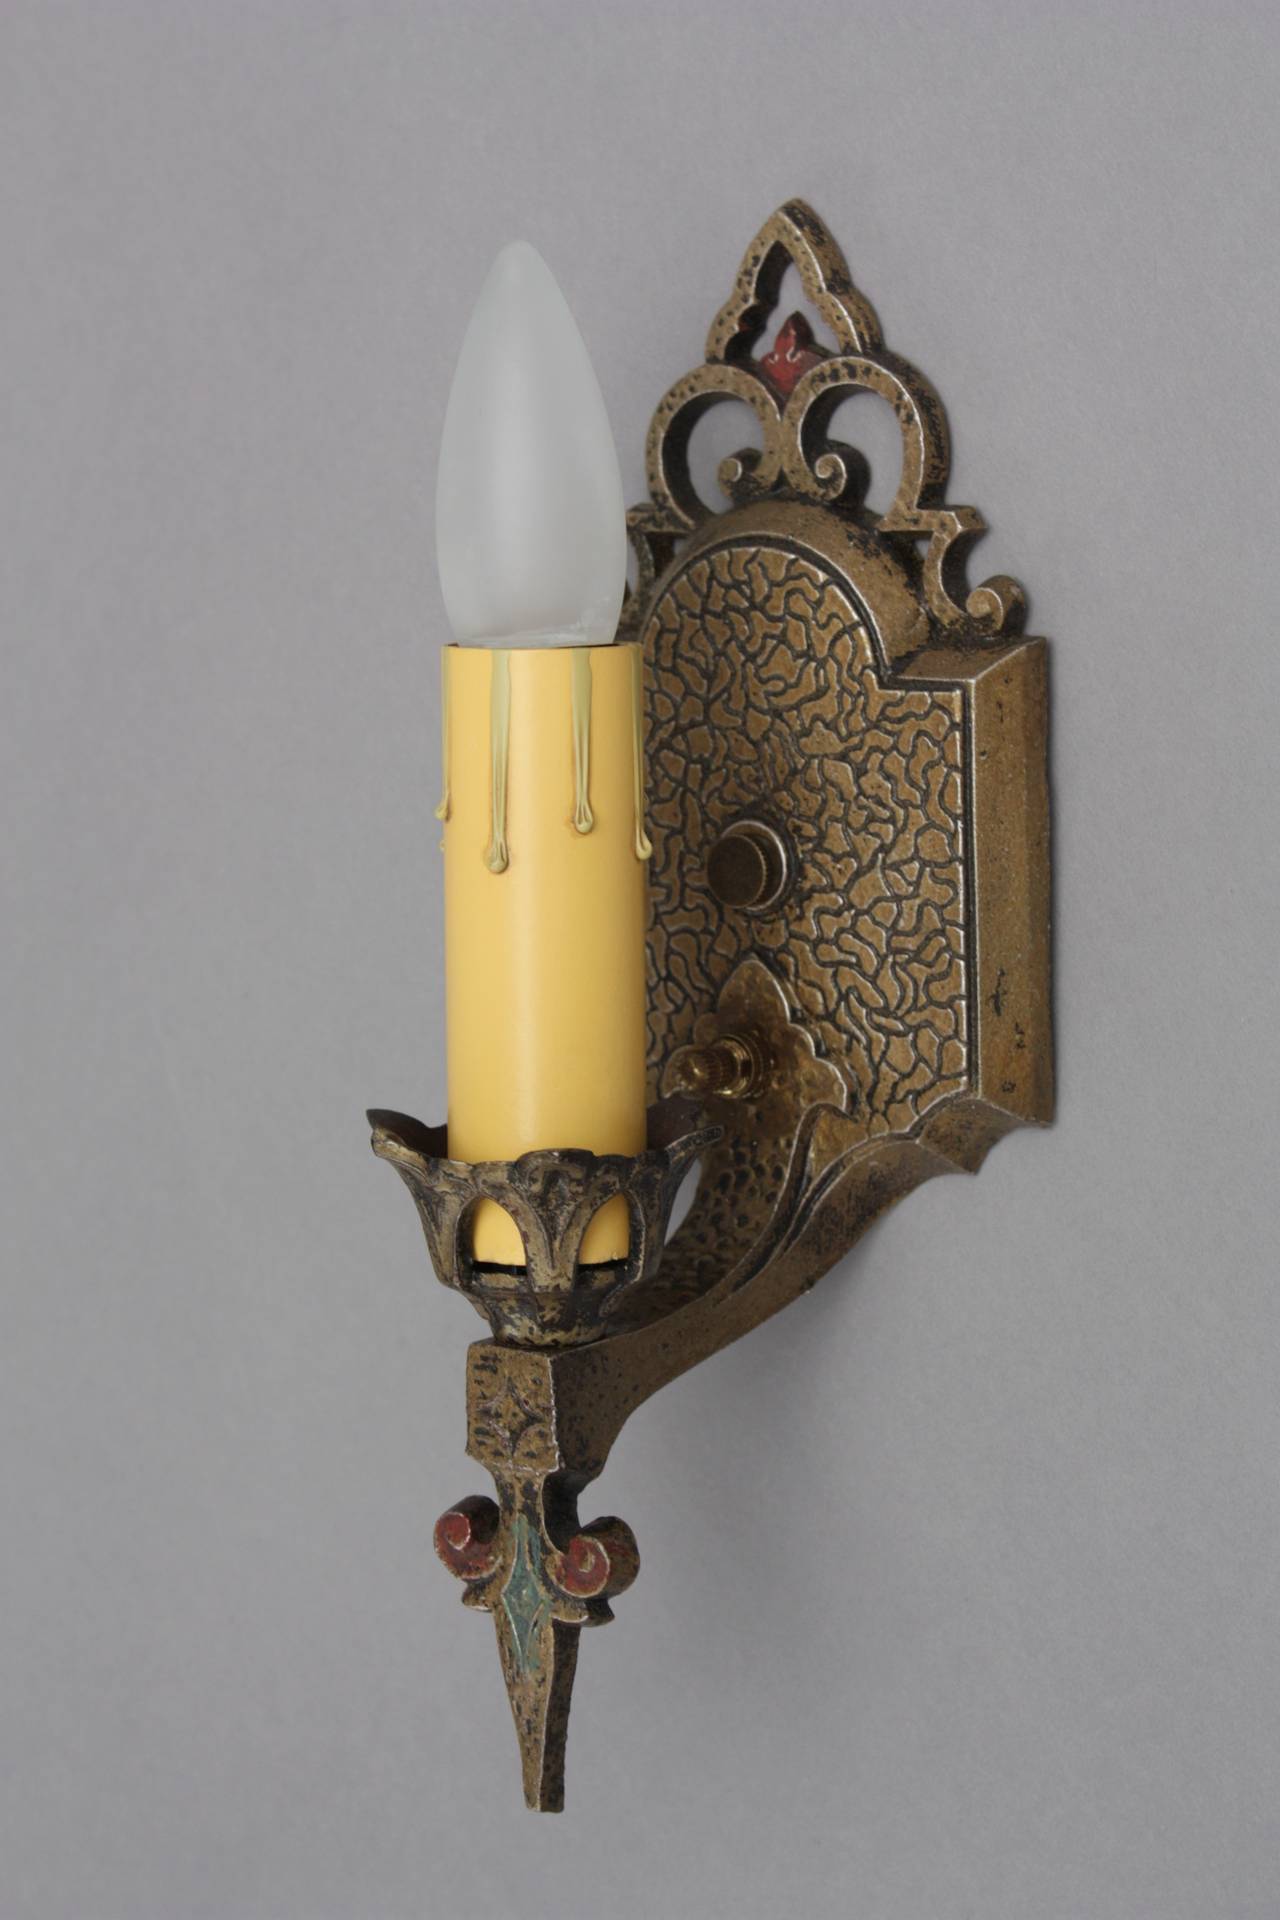 1 of 5 Single Polychrome Sconces
Sold and priced individually, circa 1920s. Original finish 11